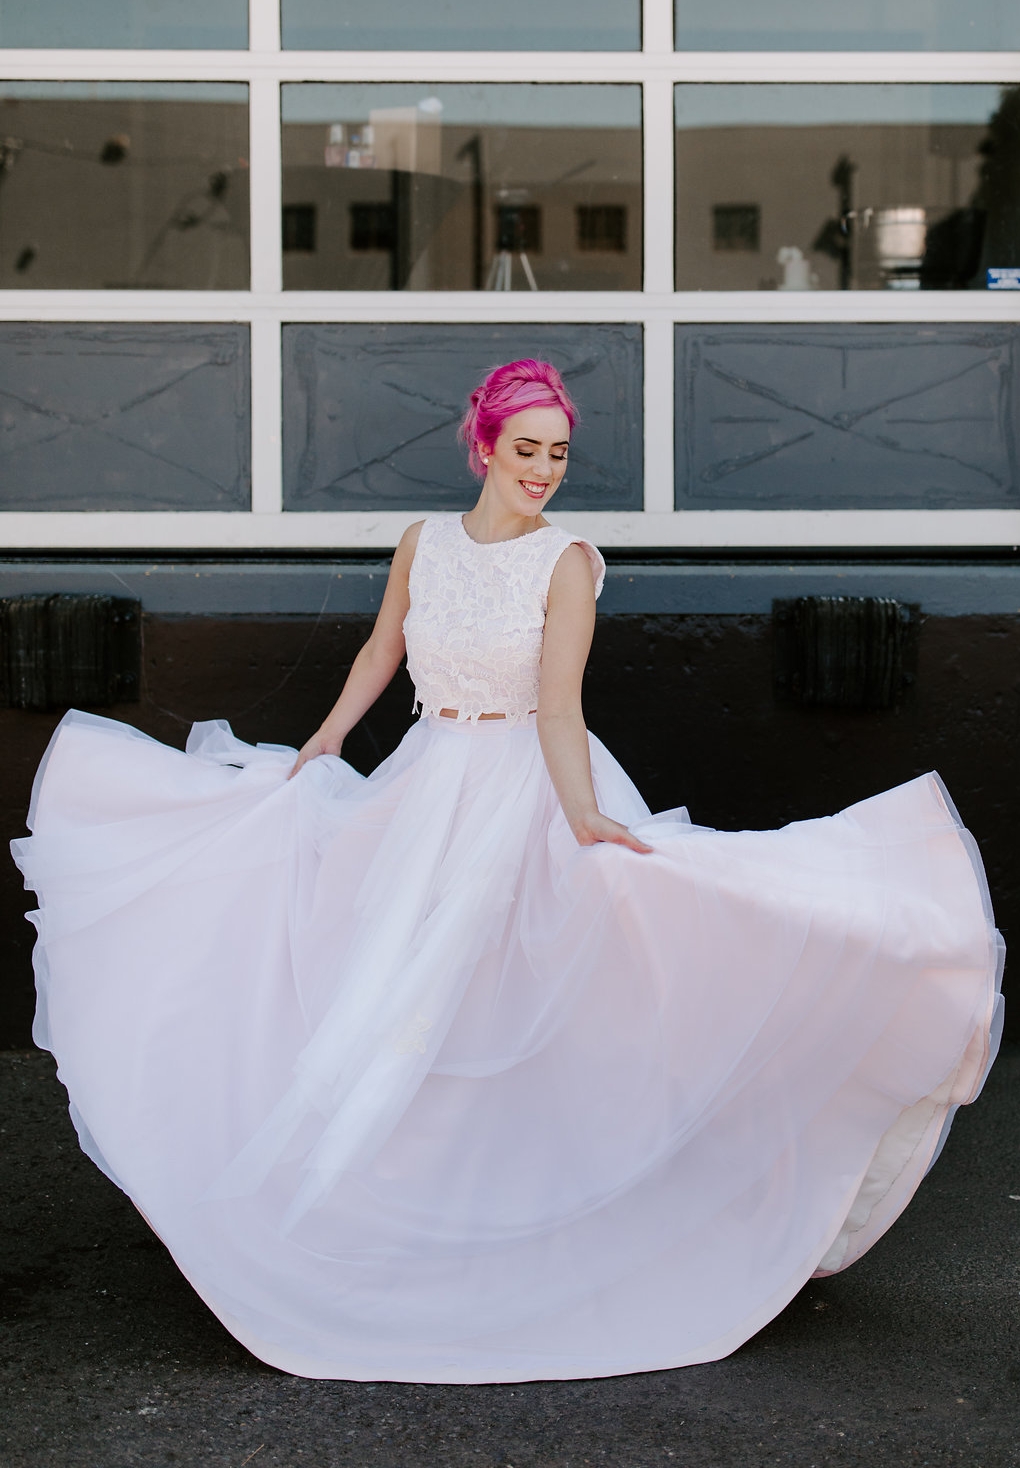  Custom 2 piece wedding dress. Multi-layer/tiered circle skirt with crop lace top - blush satin and tulle 